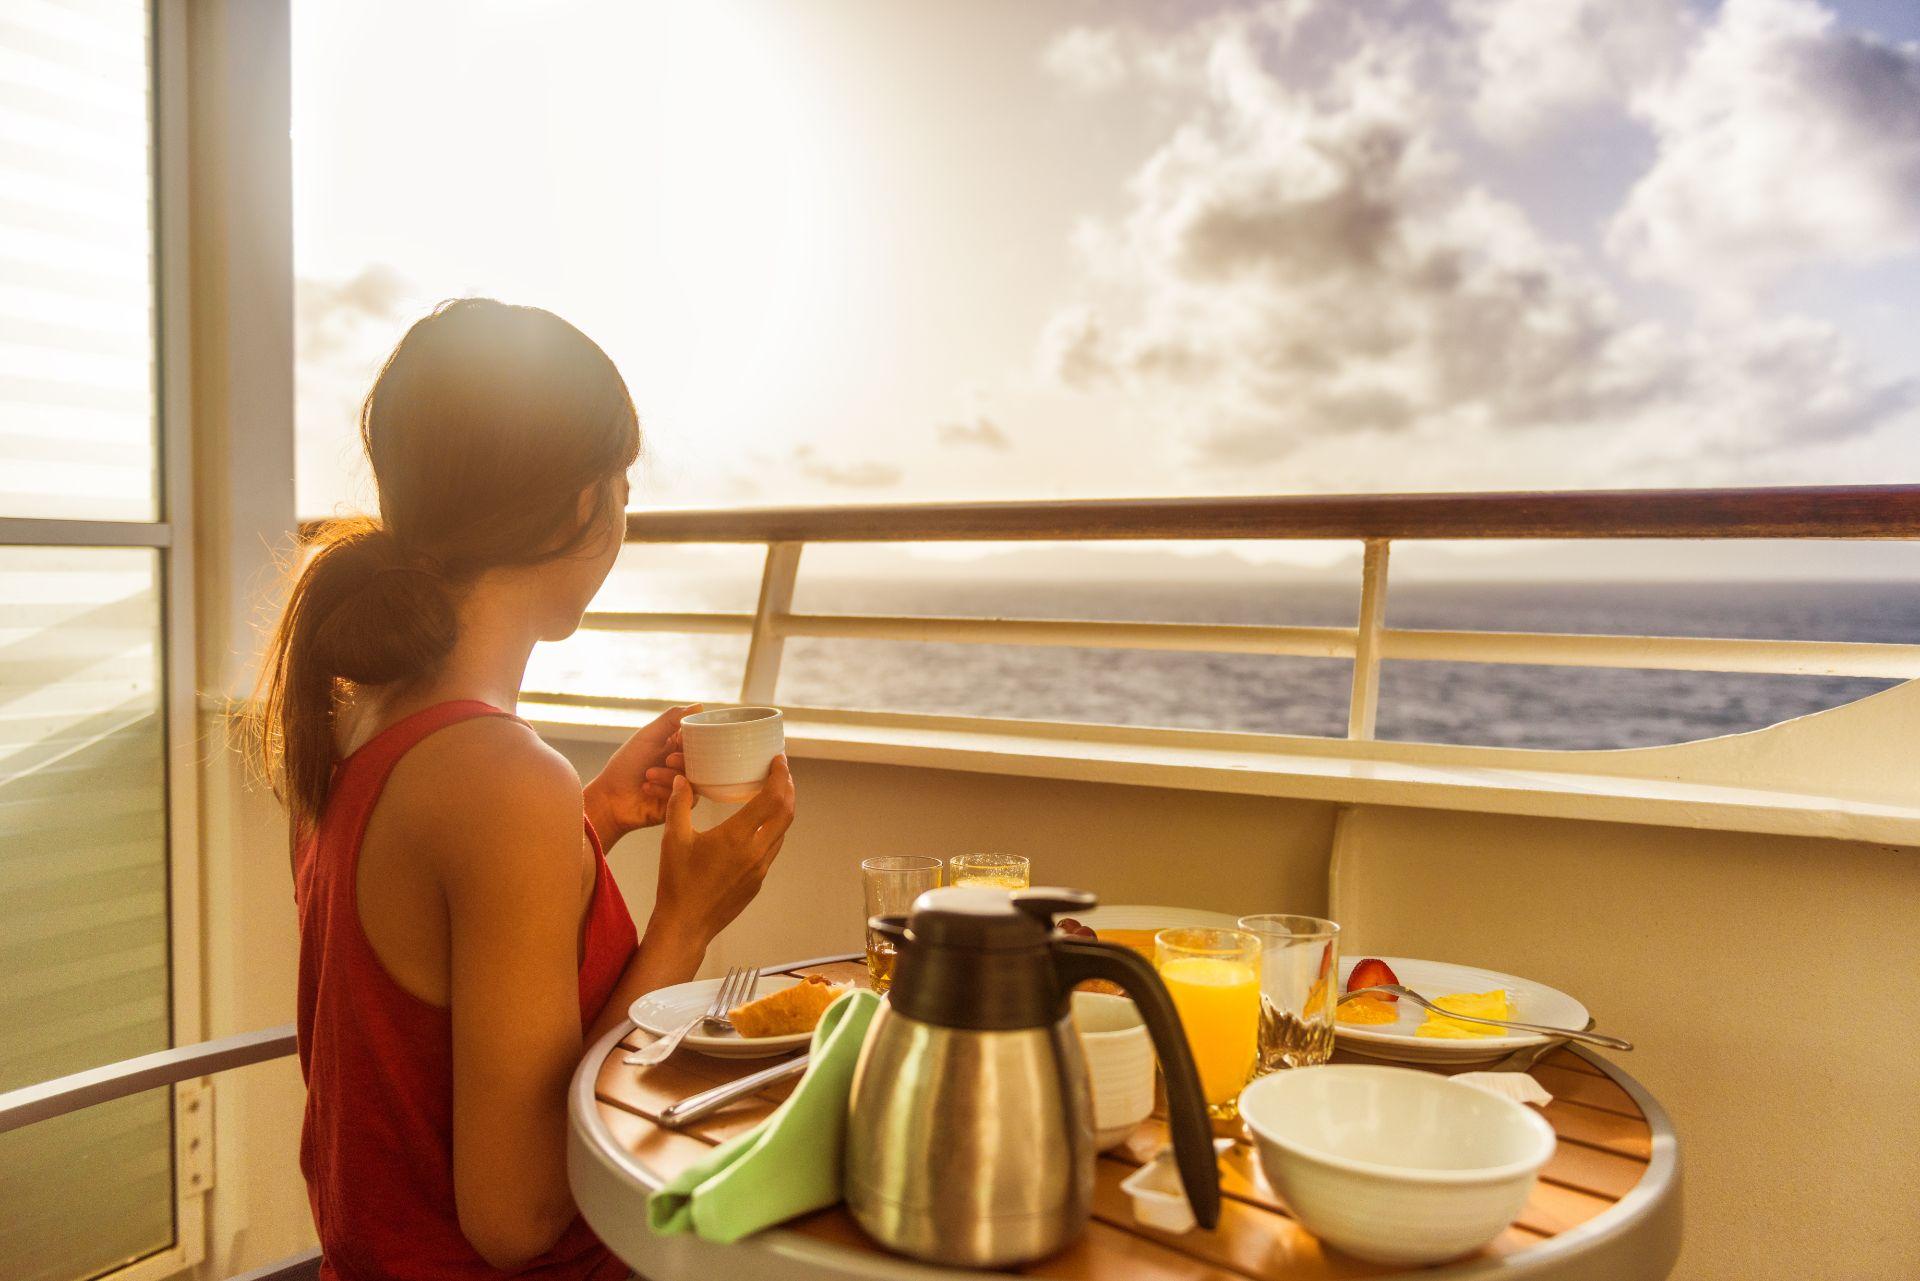 Cruise ship woman eating breakfast from room service on suite balcony enjoying morning view of Caribbean ocean.